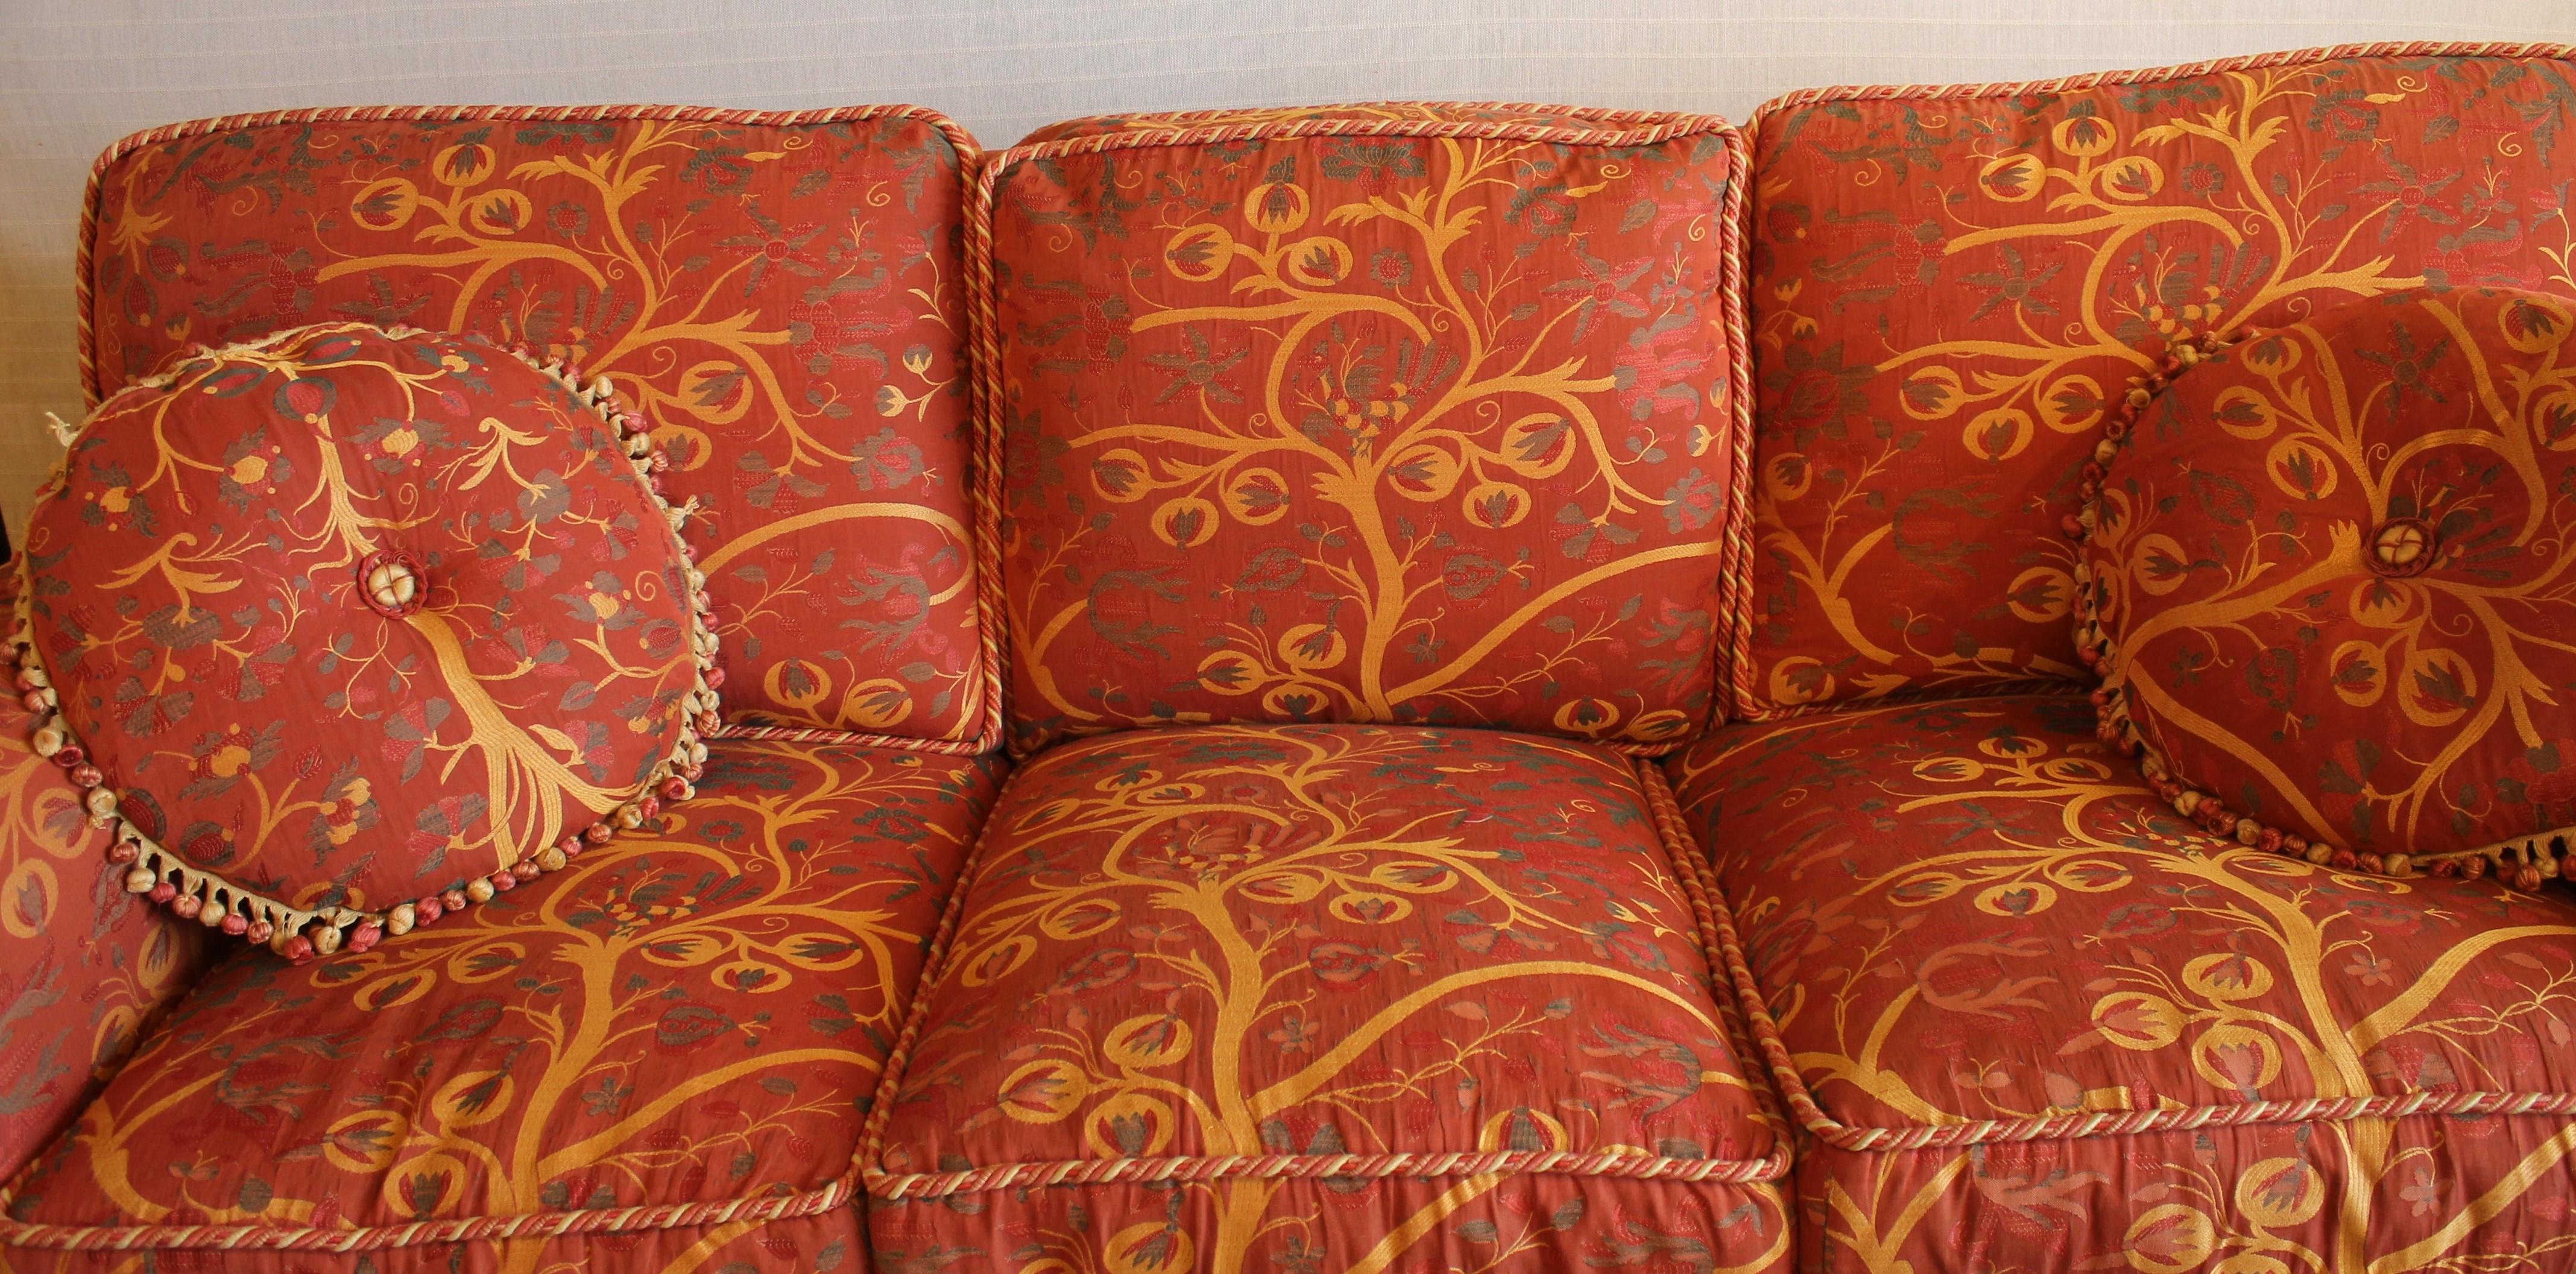 20th Century Pairs Of Sofas With Floral Decor